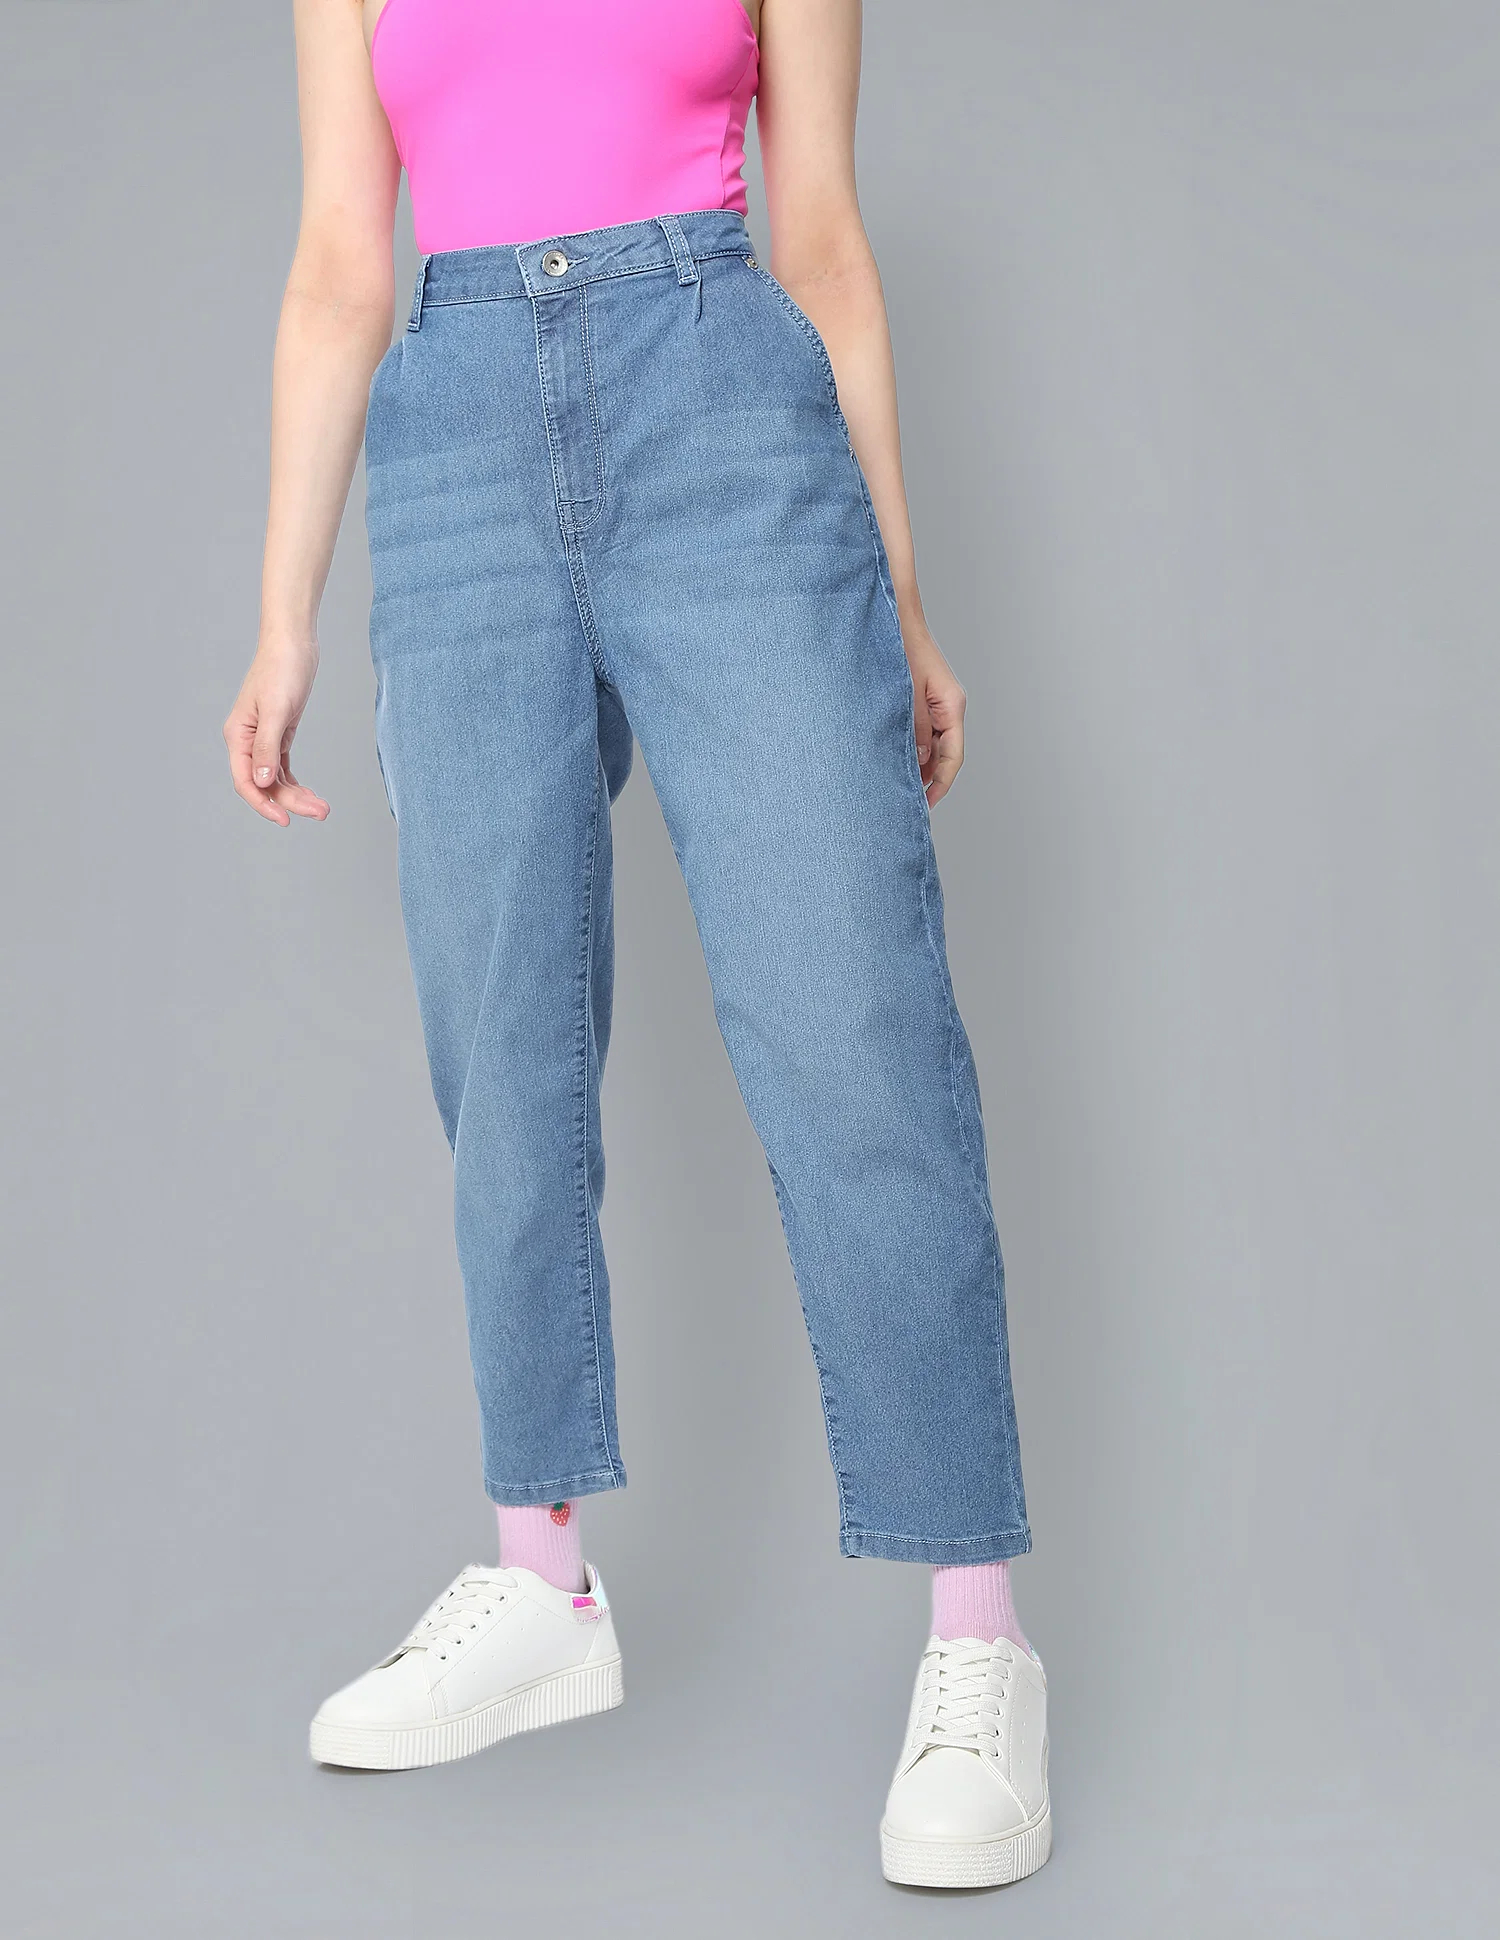 Mom jeans for women have become a popular and beloved fashion trend among women of all ages for several reasons.